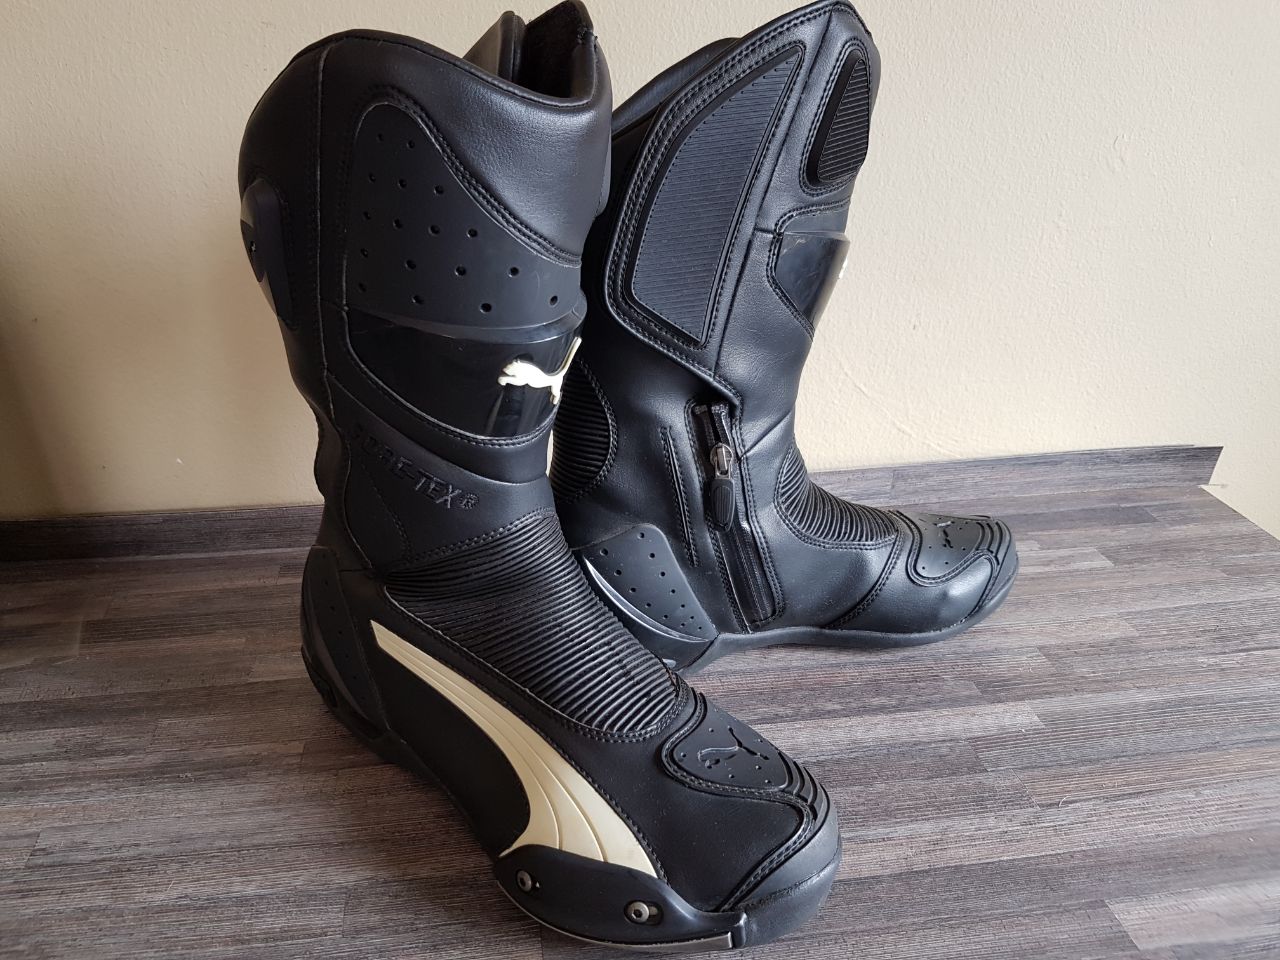 Puma Gore-tex motorcycle riding boots | Junk Mail